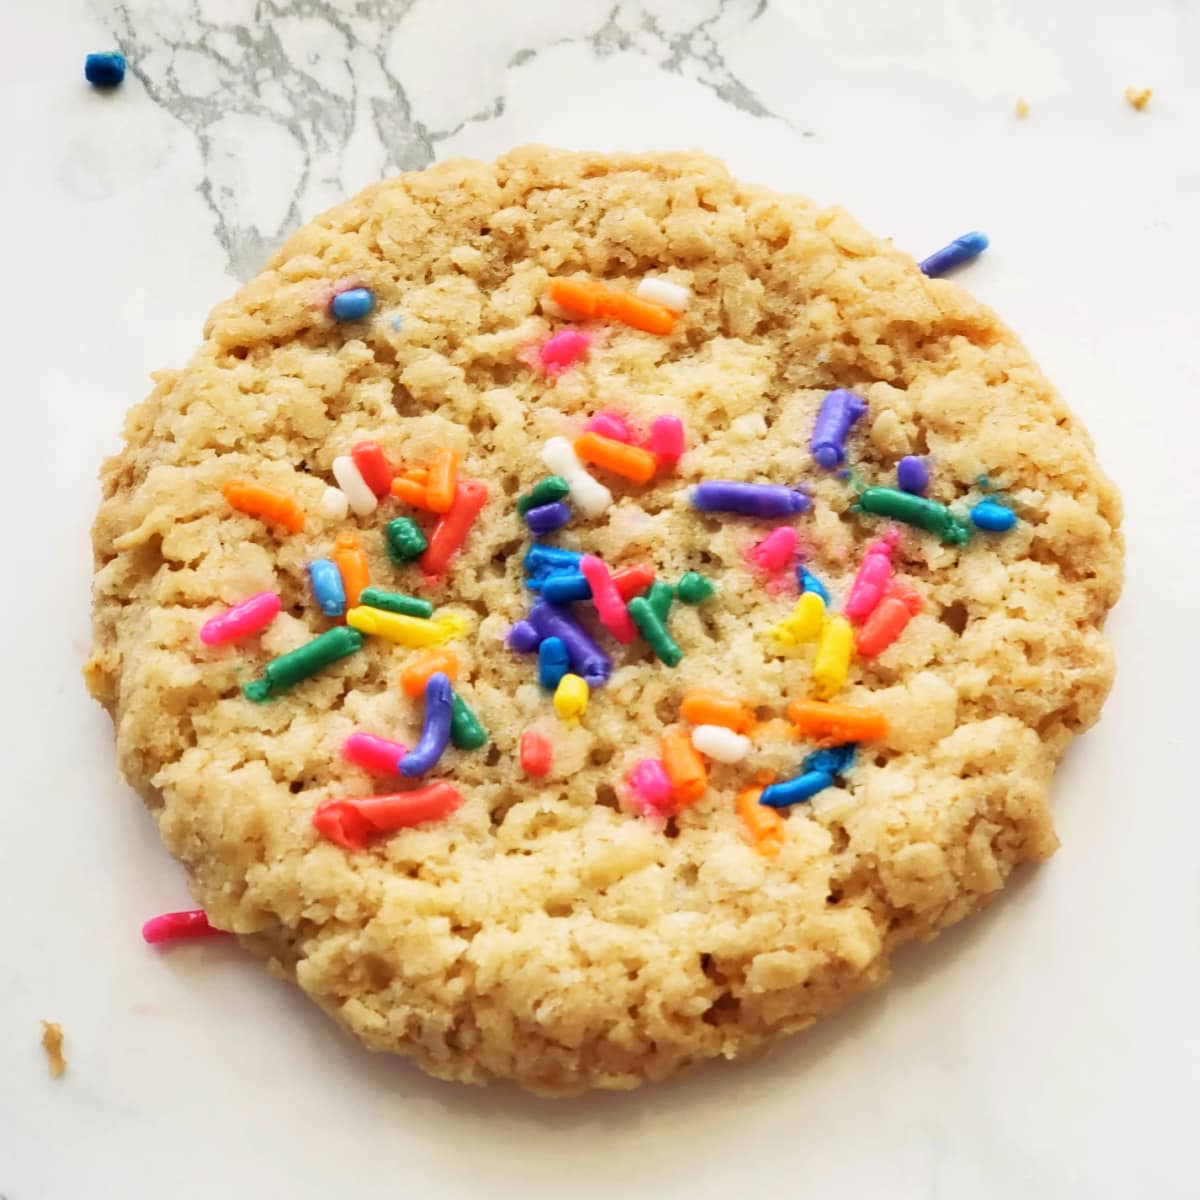 Single cookie with colorful sprinkles on top on a white marble counterop